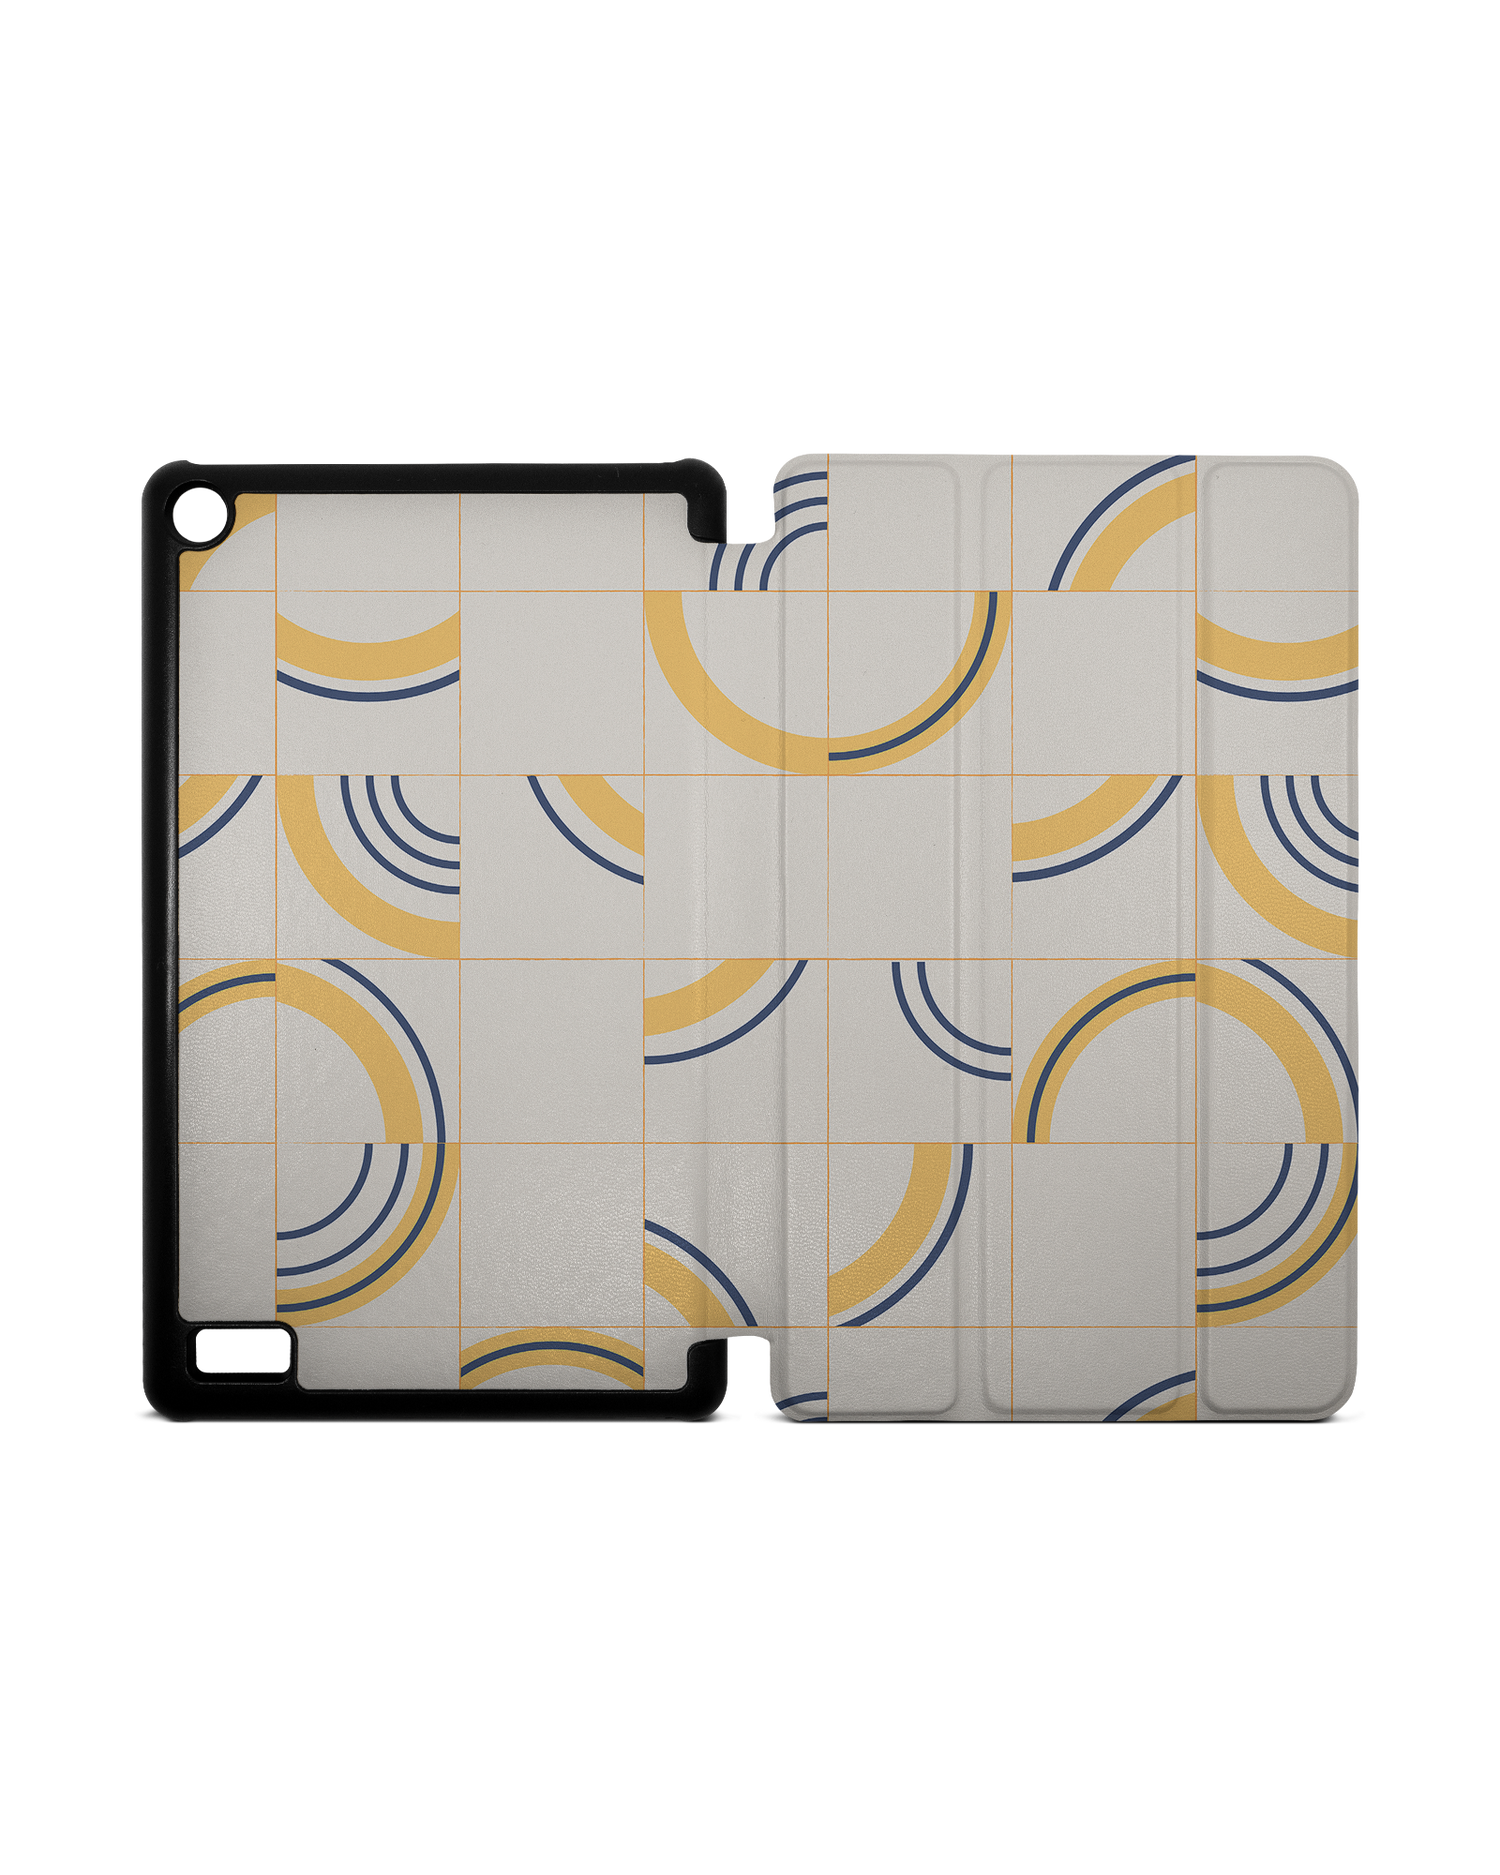 Spliced Circles Tablet Smart Case for Amazon Fire 7: Opened